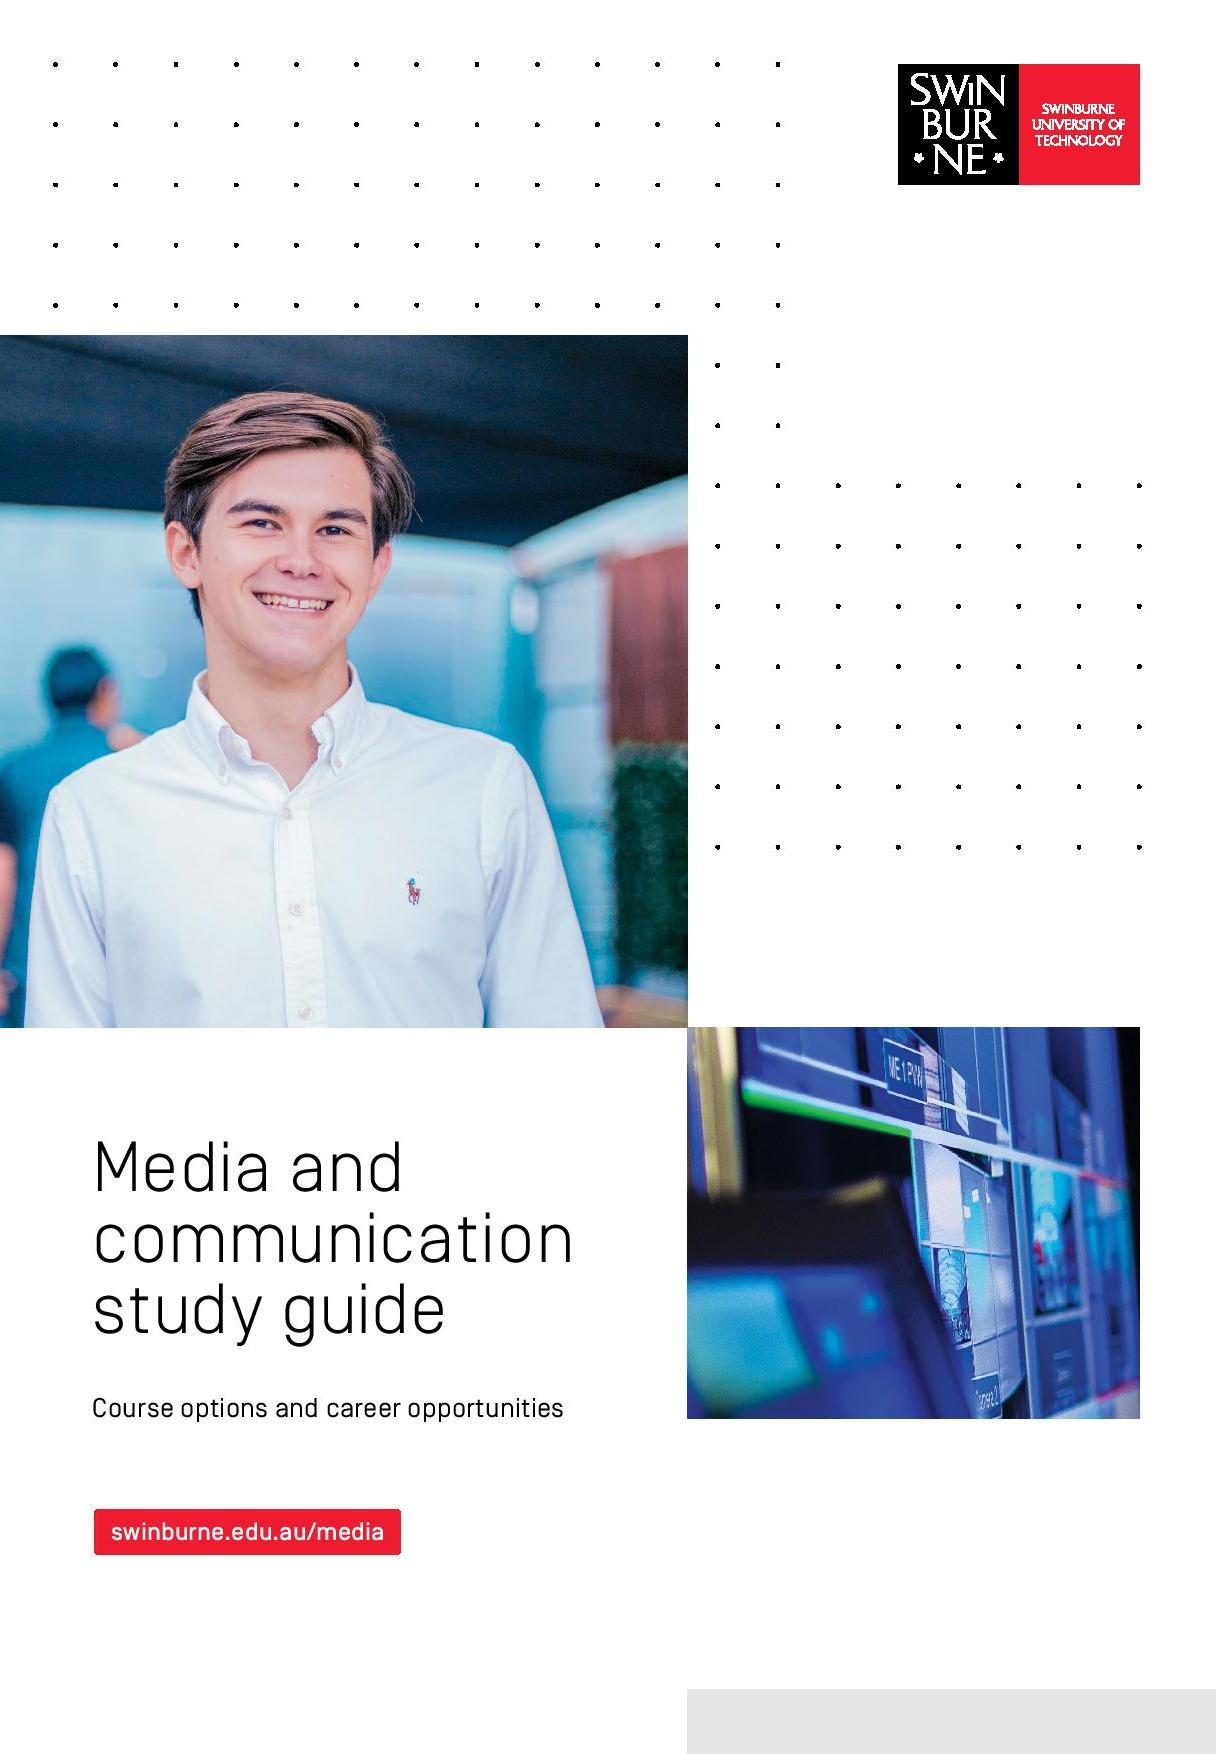 Media and communication study guide